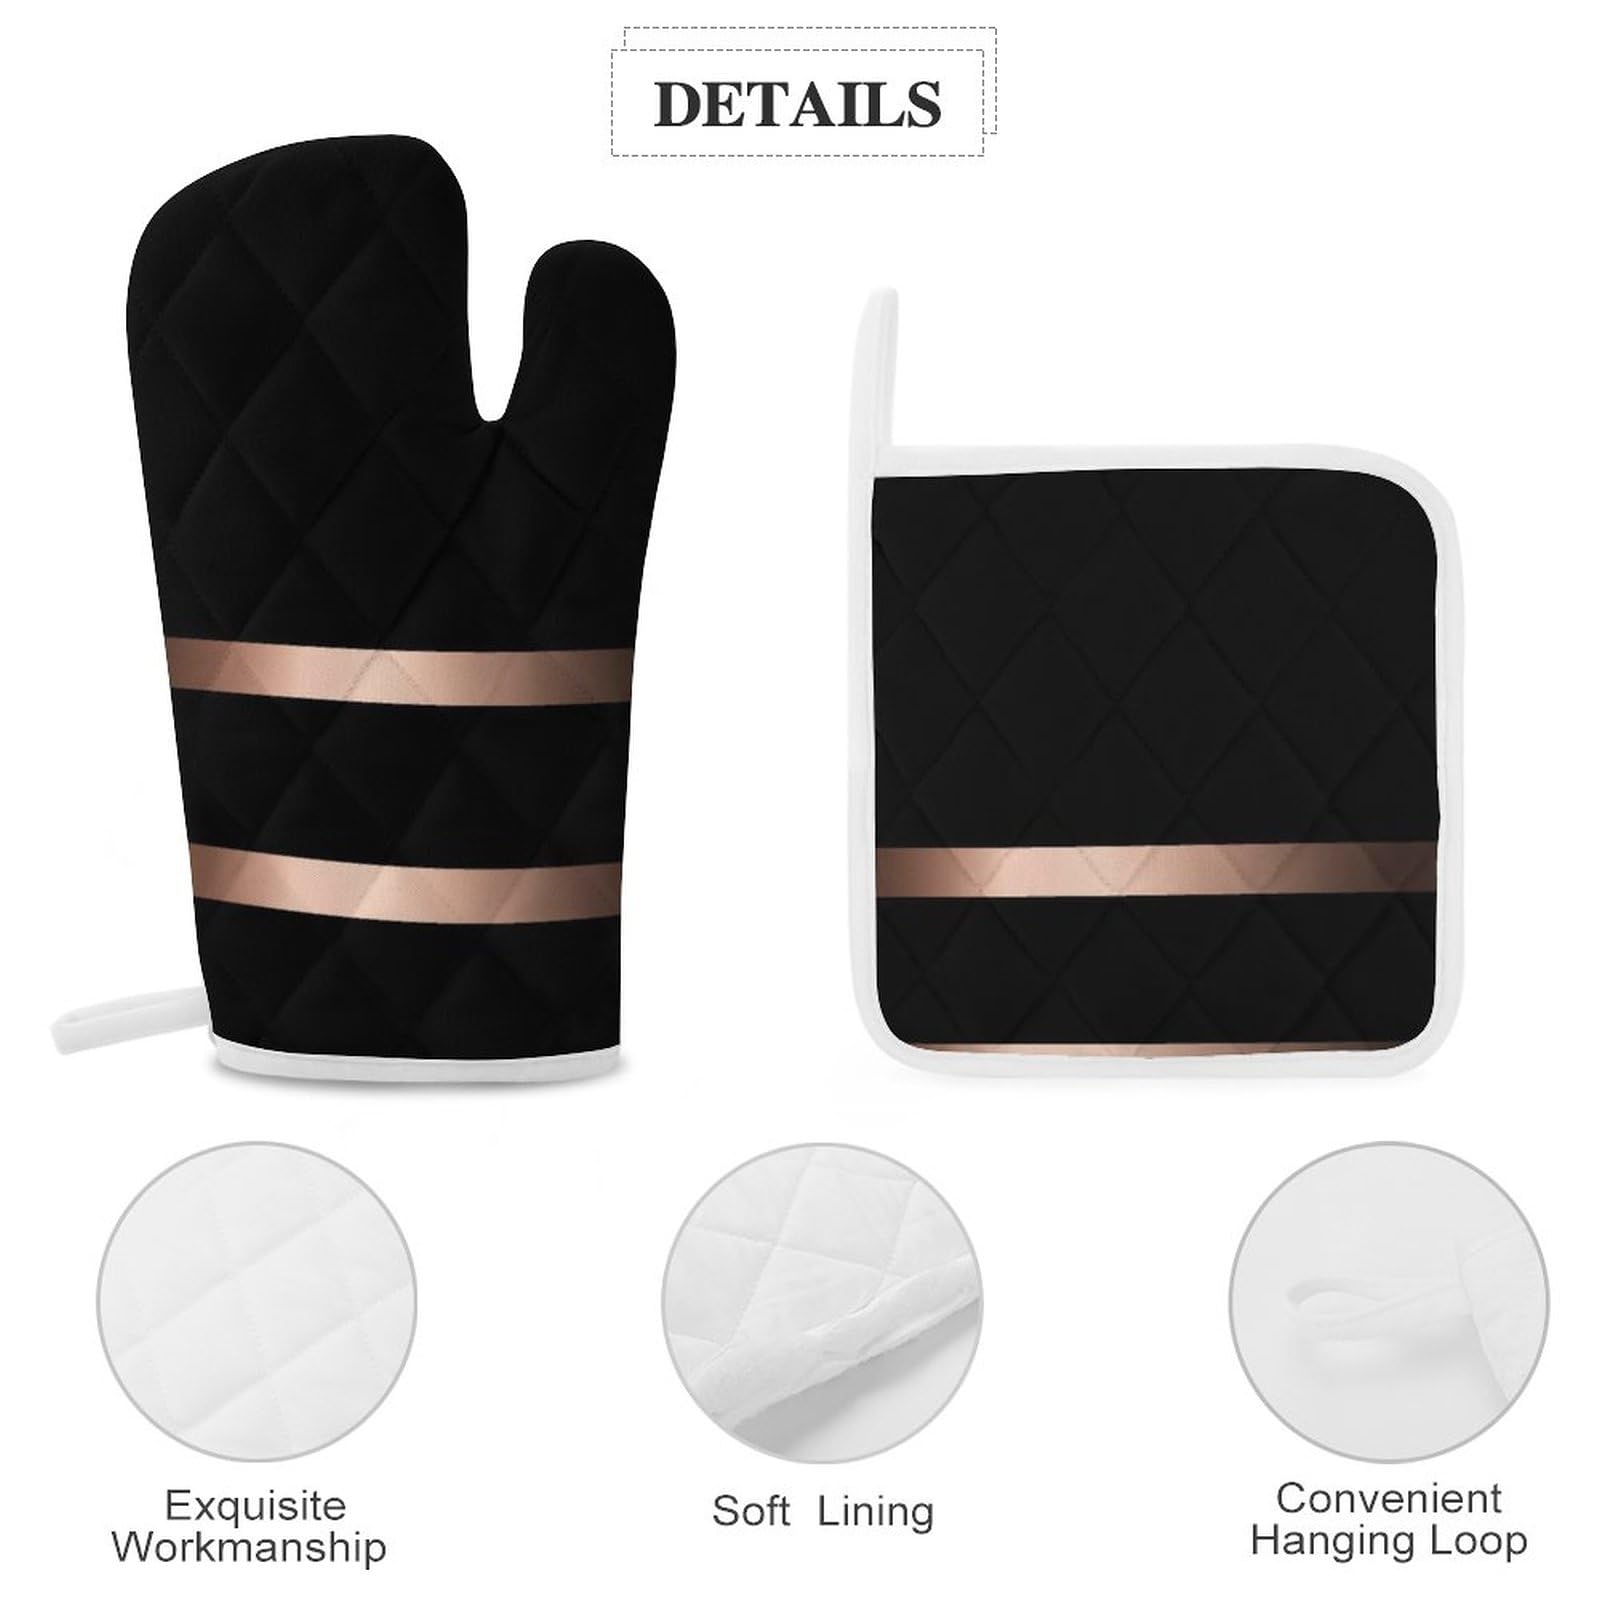 4Pcs Oven Mitts and Pot Holders Set, Black Stylish Rose Gold Heat Resistant Oven Mitts Gloves Set Hot Pads for Kitchen Cooking Grill